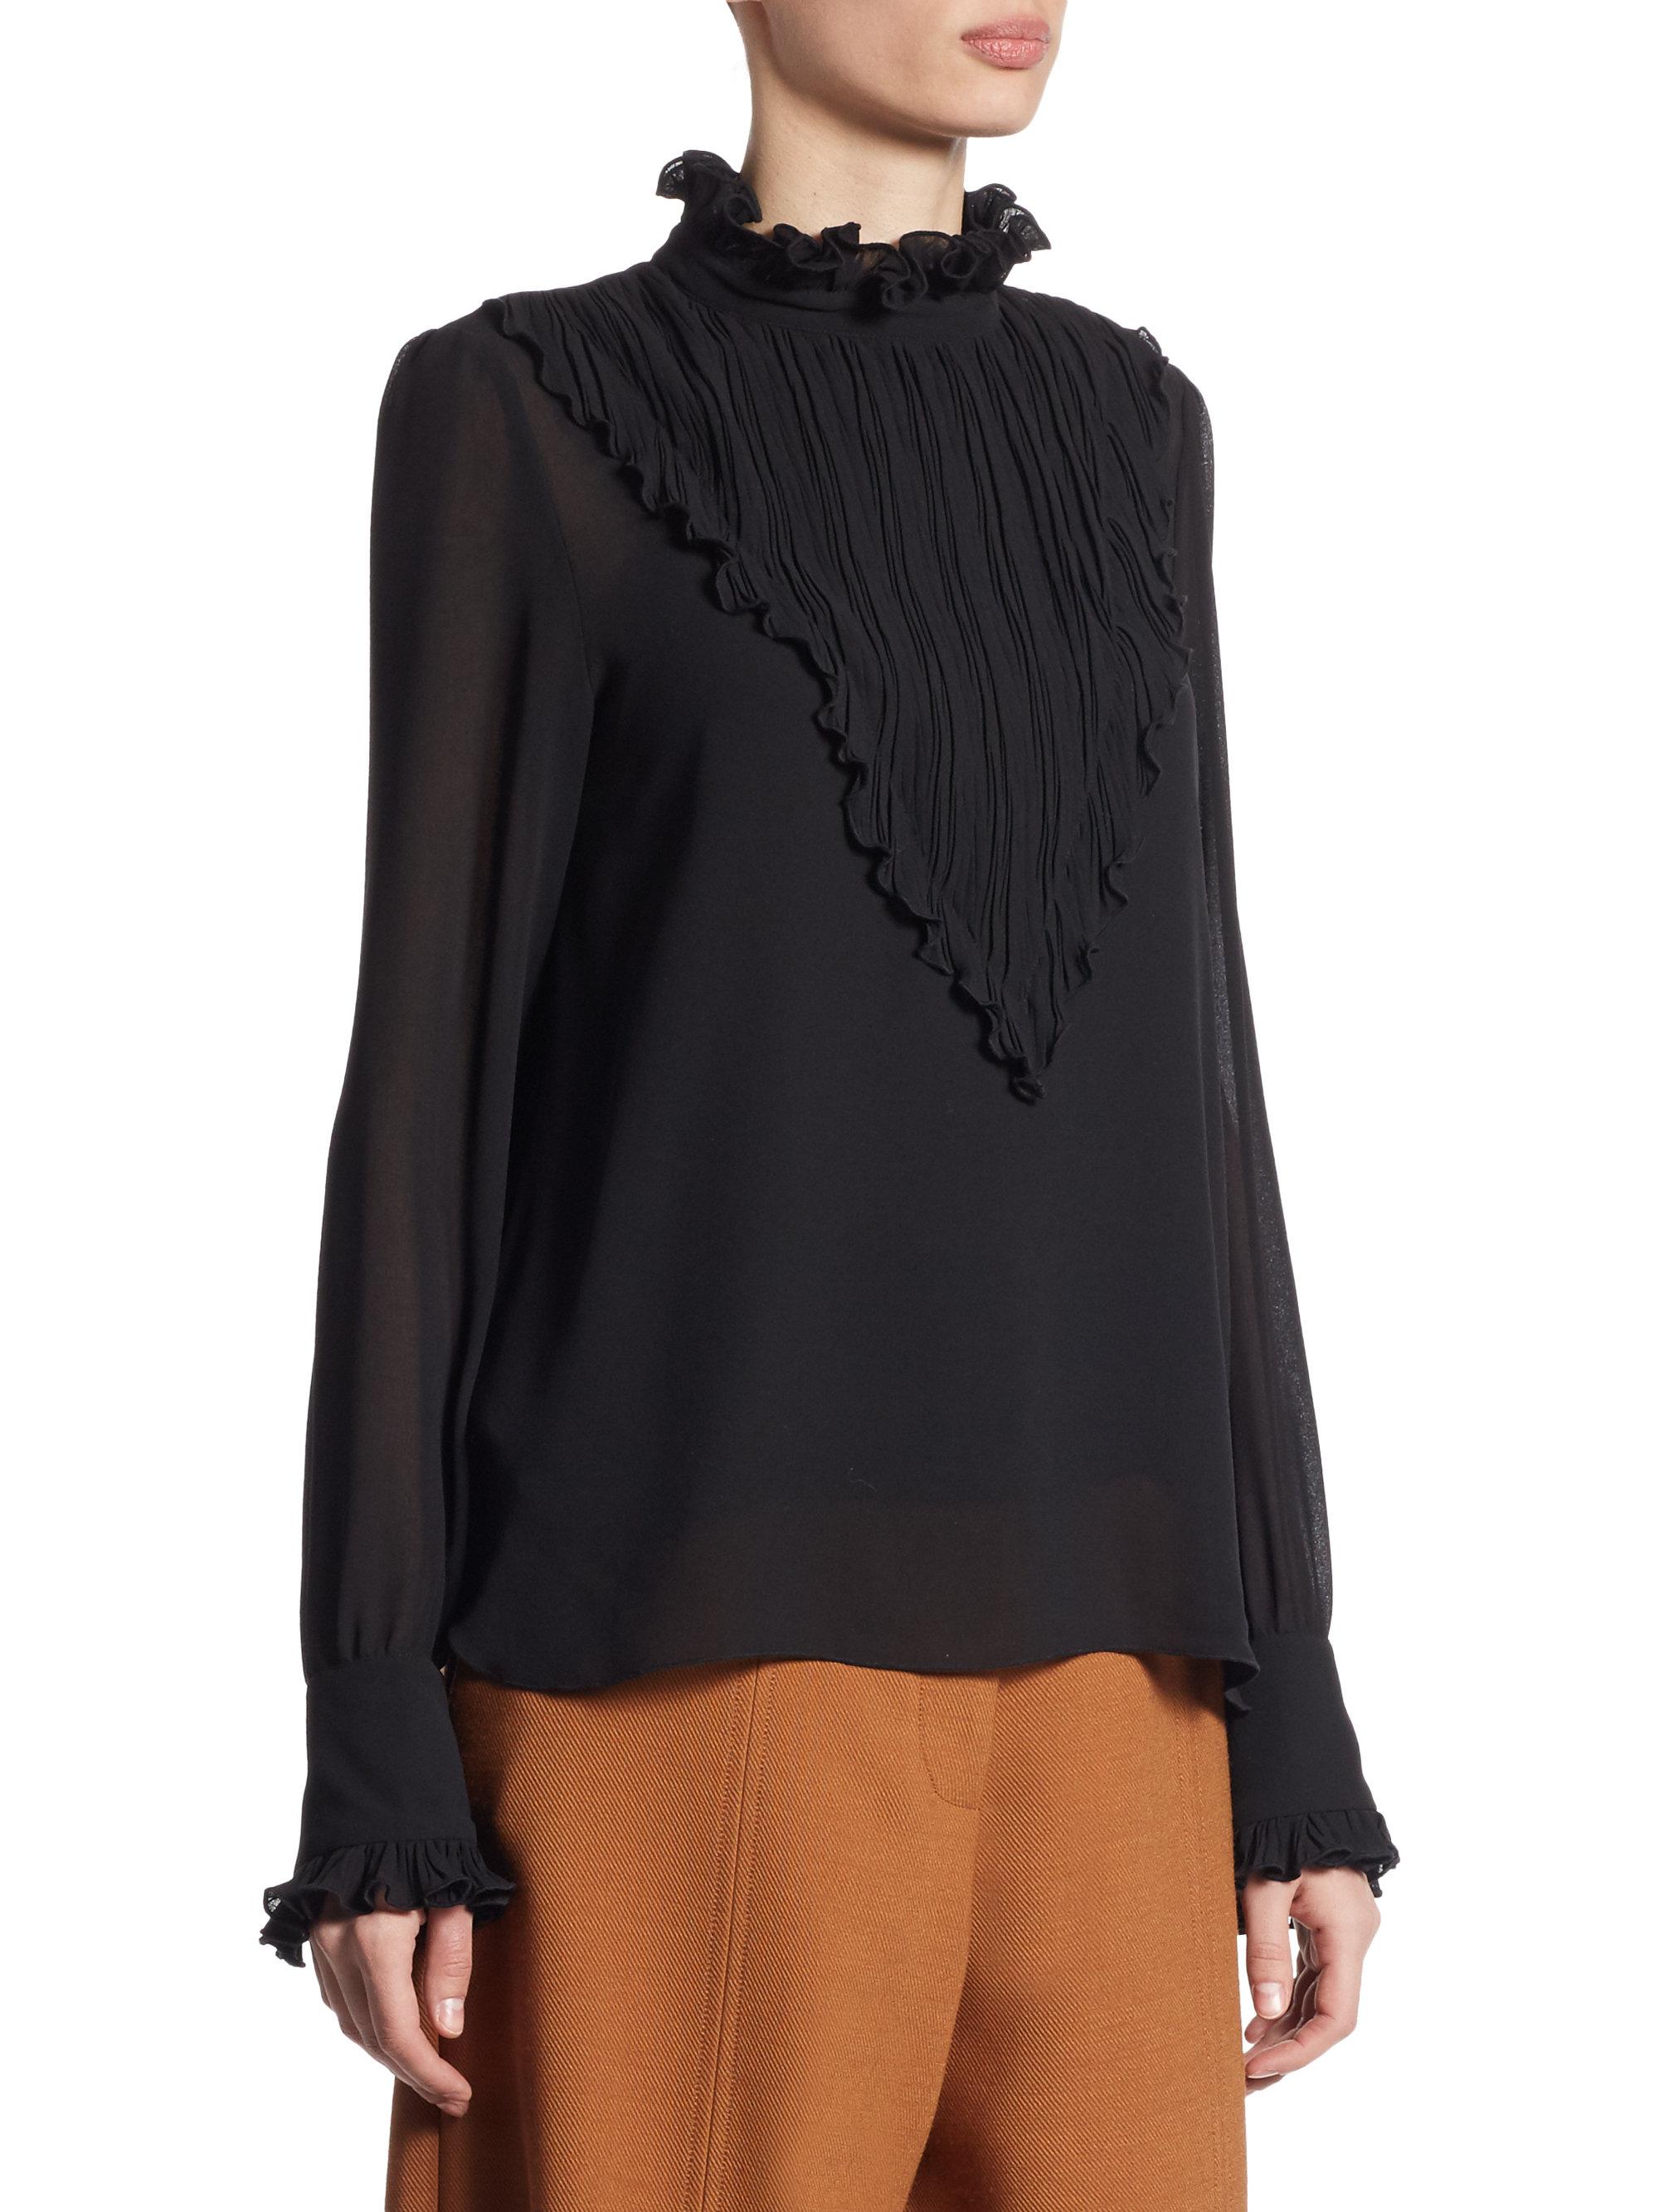 See By Chloé Pleated Bib Long Sleeve Blouse in Black - Lyst